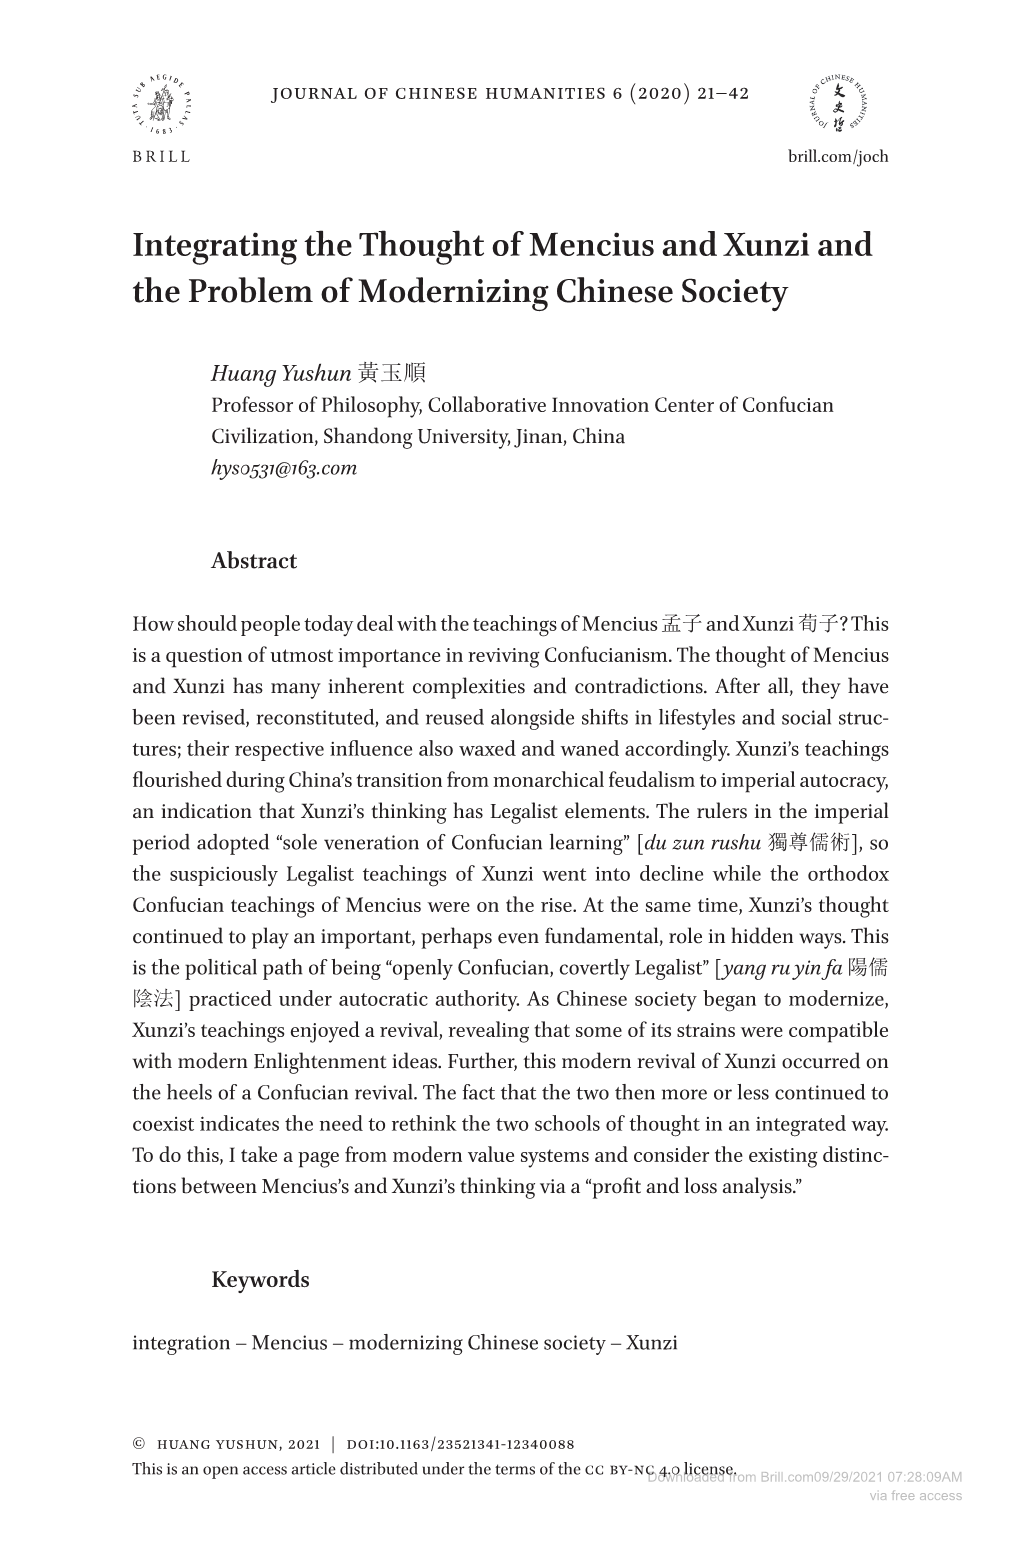 Integrating the Thought of Mencius and Xunzi and the Problem of Modernizing Chinese Society